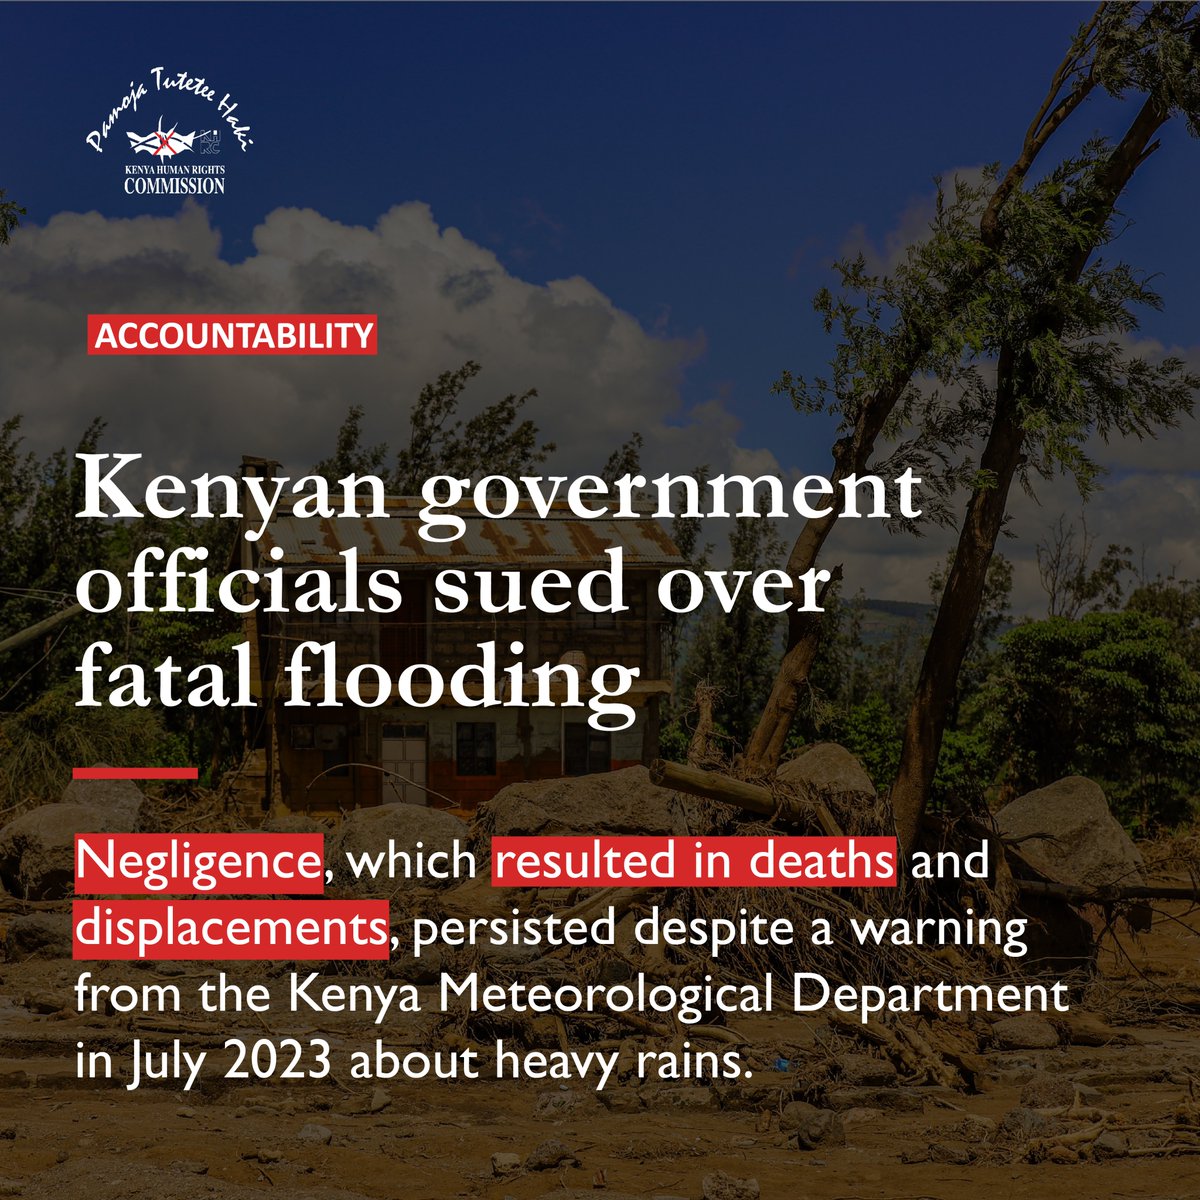 #BreakingNews‌ KHRC has filed a lawsuit against three cabinet secretaries because their negligence caused deaths and displacements during floodings. More: khrc.or.ke/news/kenyan-go…